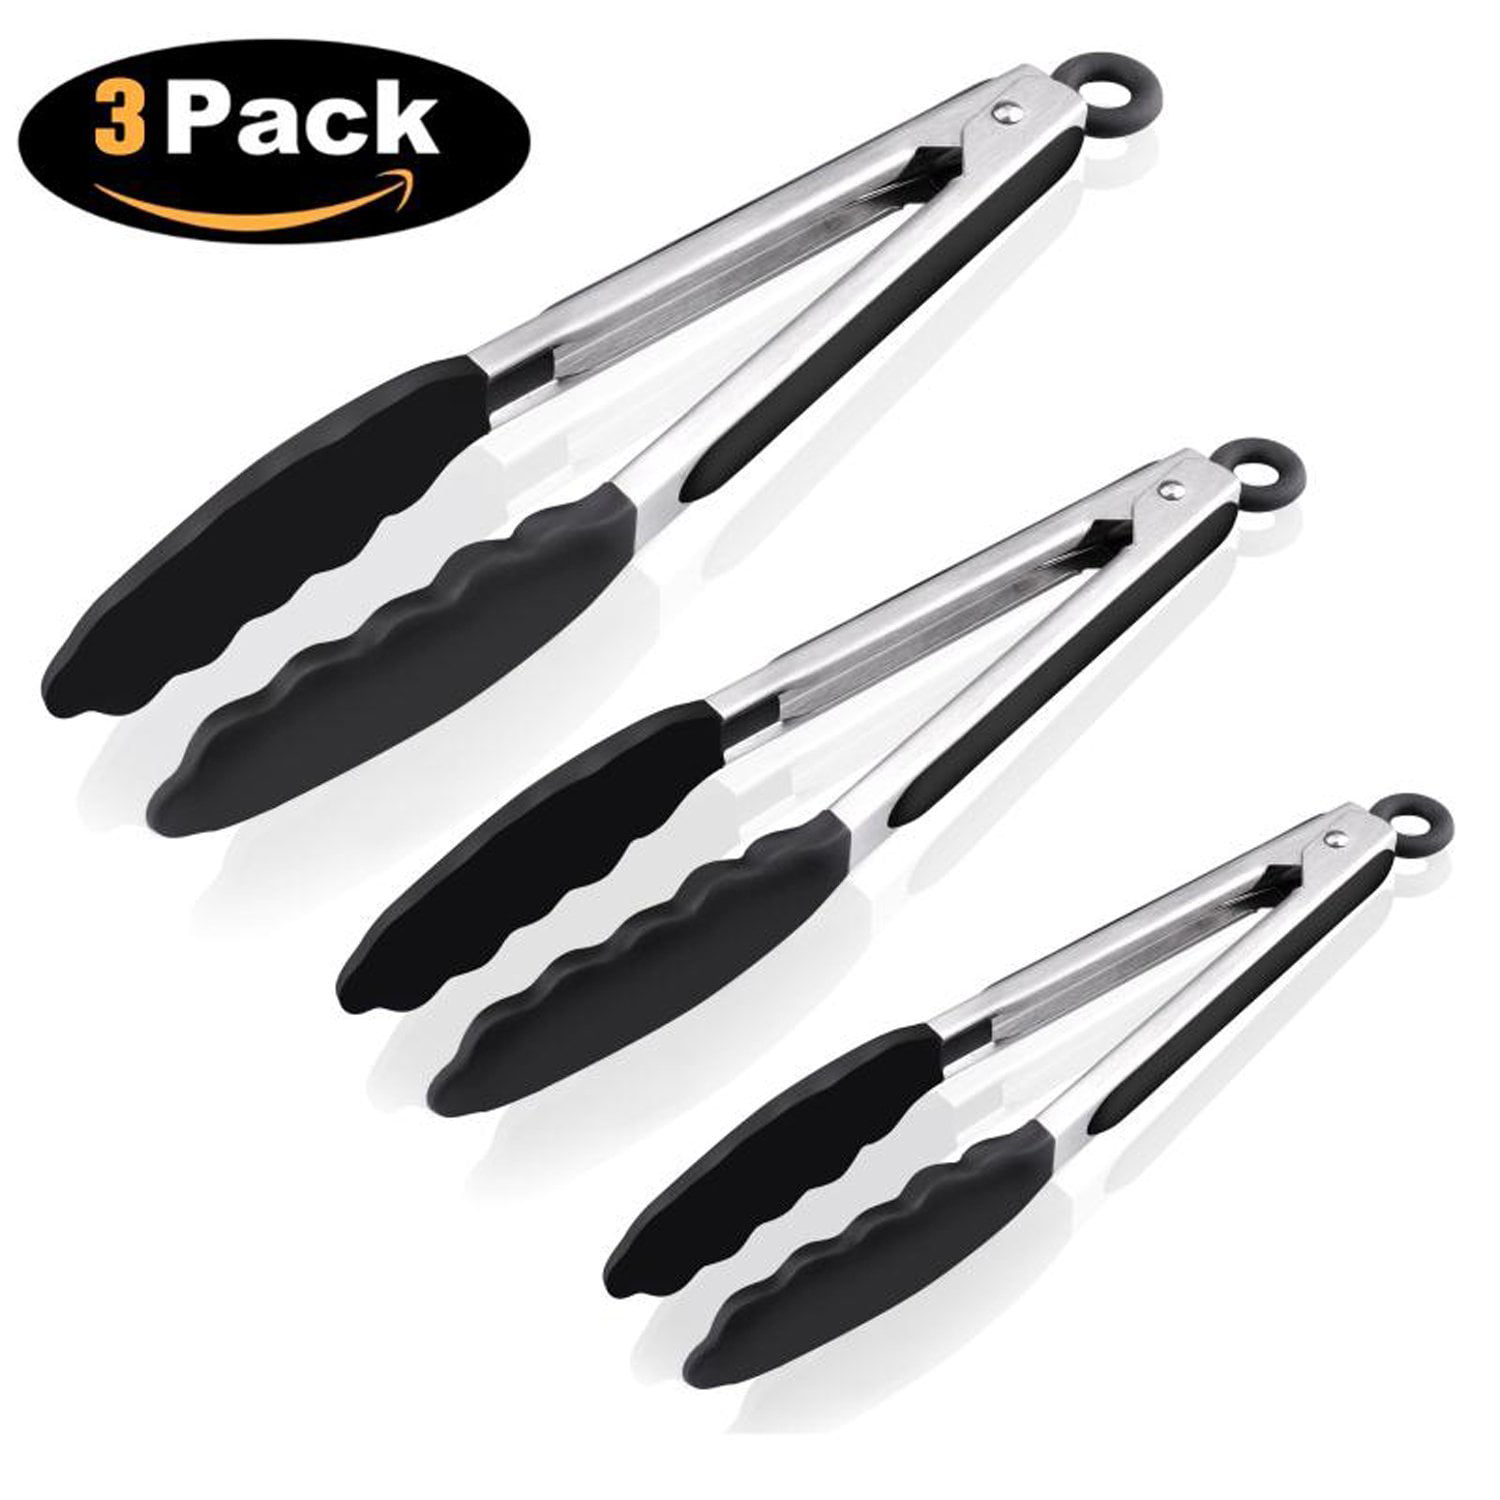 Silicone Kitchen Tongs,Heat Resistant /& BPA Free Heavy Duty Stainless Steel Non-stick Long Tongs Set with Locking Head and Silicone Tips Serving for Cooking,BBQ,Barbecue,Salad,Steak.2 Pack 9 /& 12 In